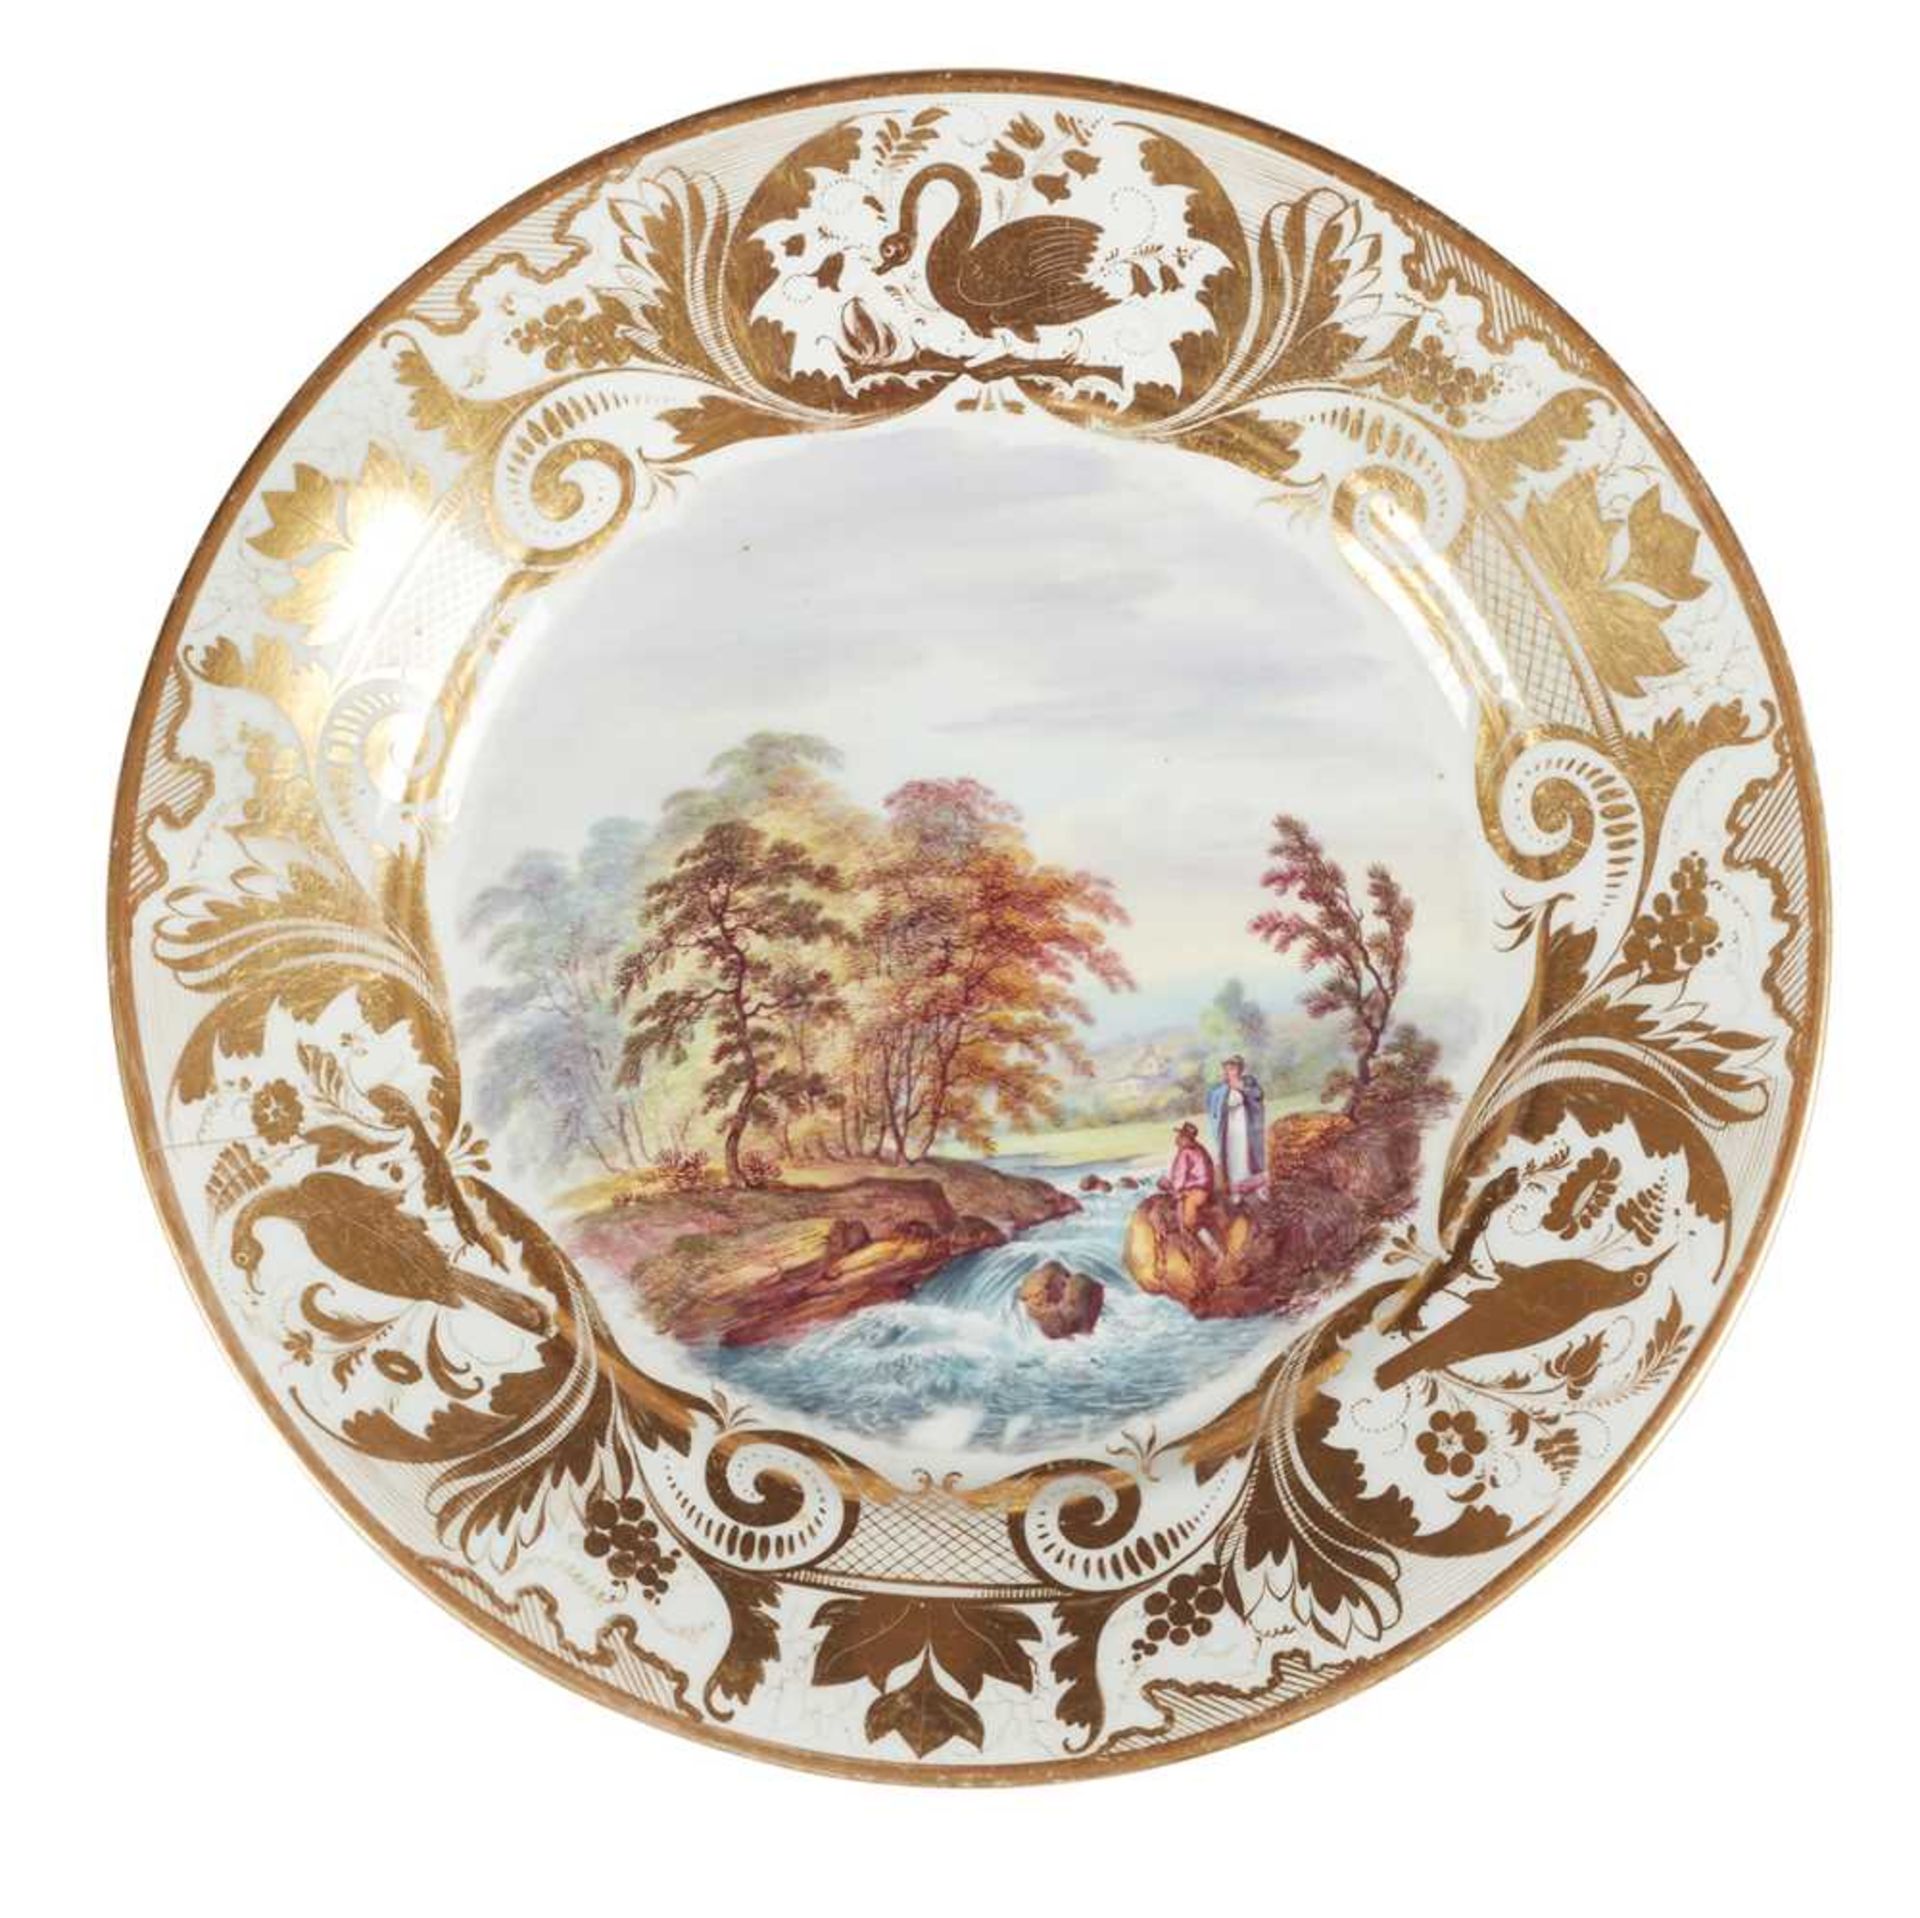 MATCHED DERBY PORCELAIN TOPOGRAPHICAL PART DESSERT SERVICE EARLY 19TH CENTURY - Image 2 of 8